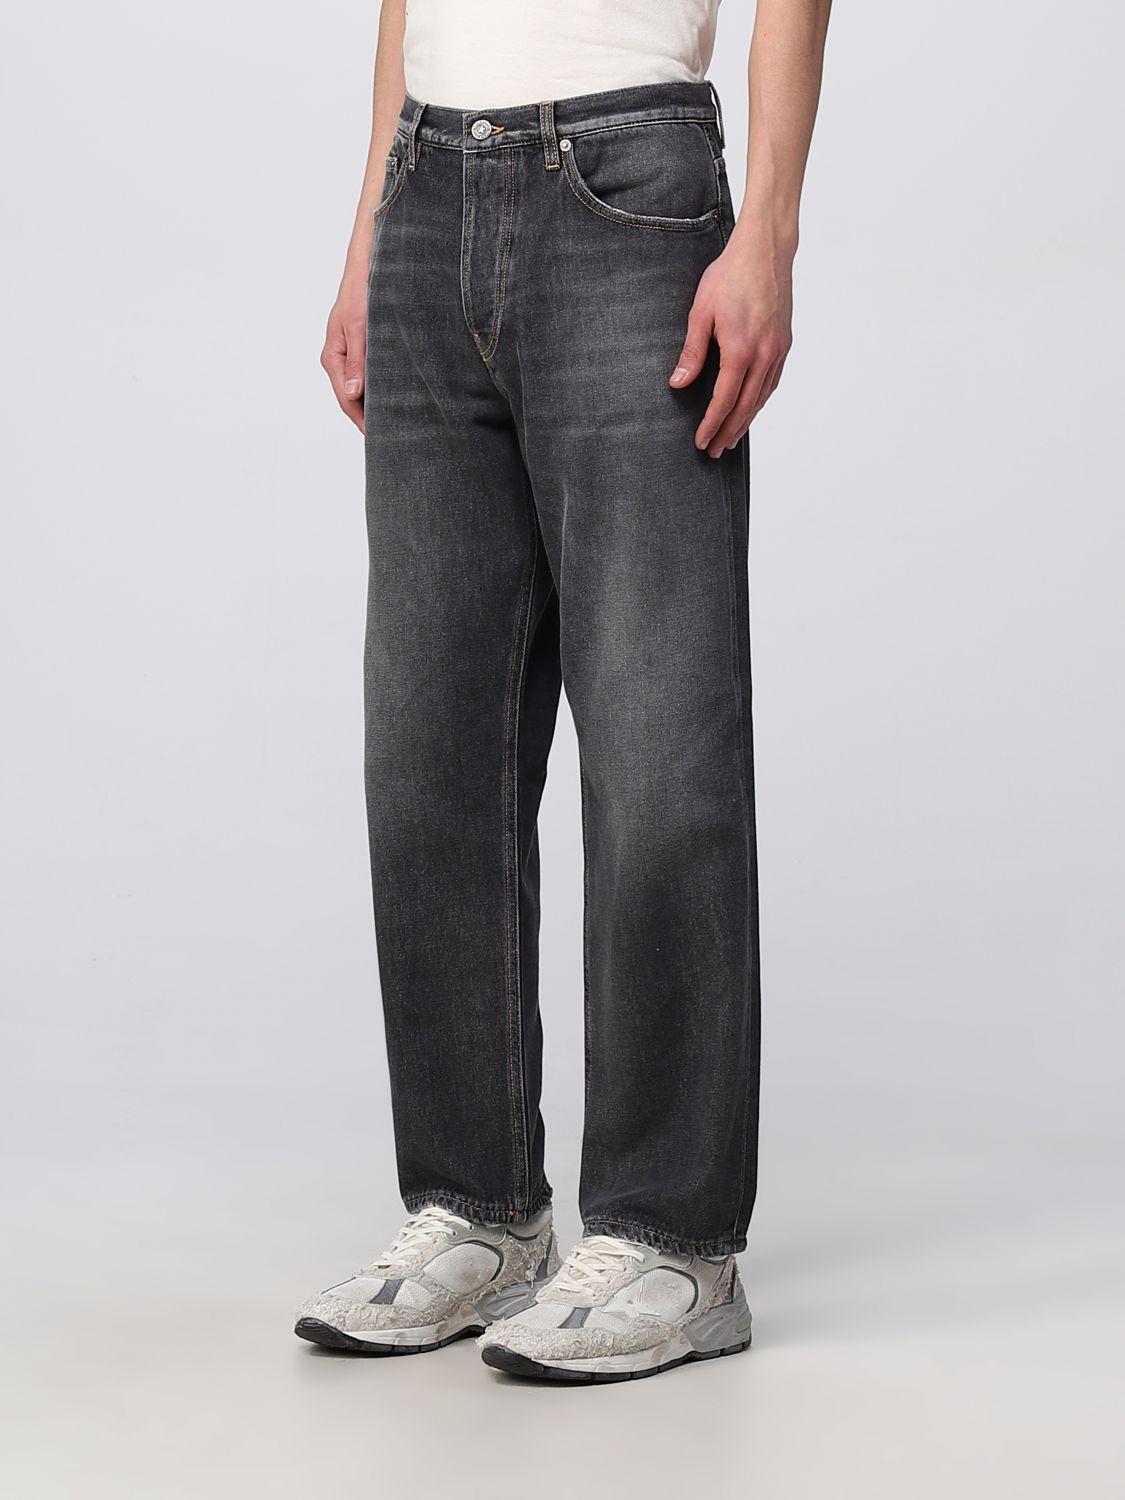 Minimaliseren loyaliteit eiwit GOLDEN GOOSE: jeans for man - Grey | Golden Goose jeans  GMP01186P00099490100 online on GIGLIO.COM